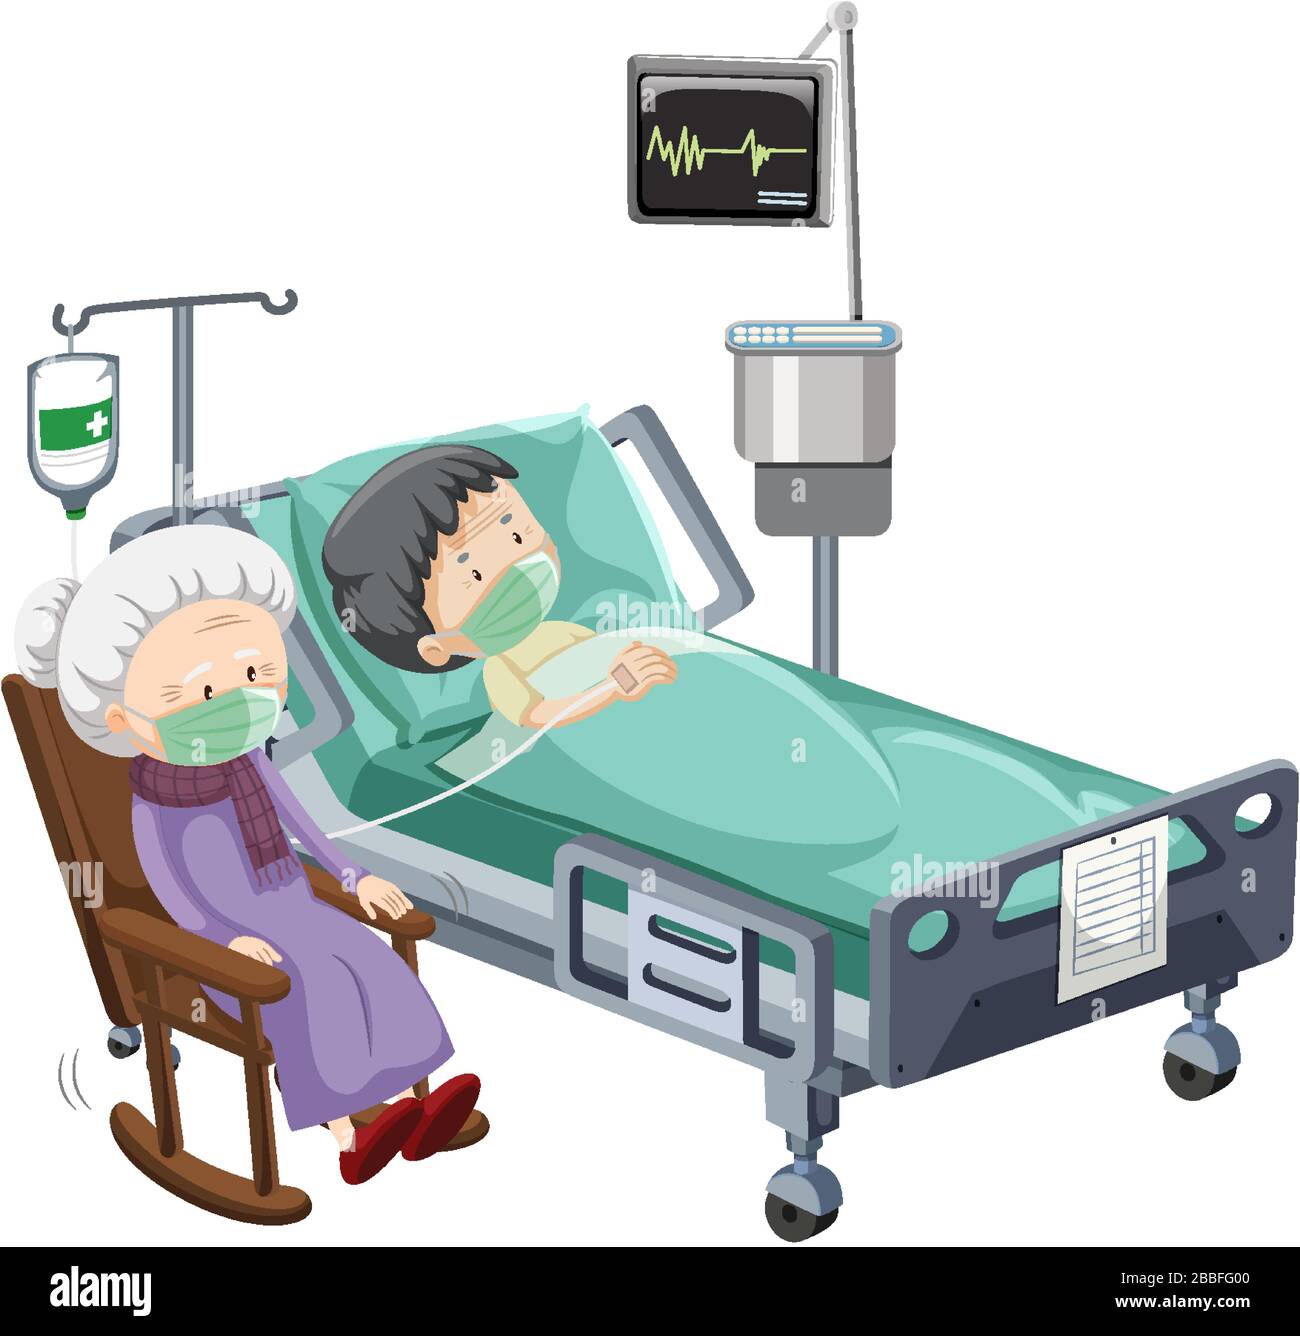 Hospital Patient In Bed Clipart